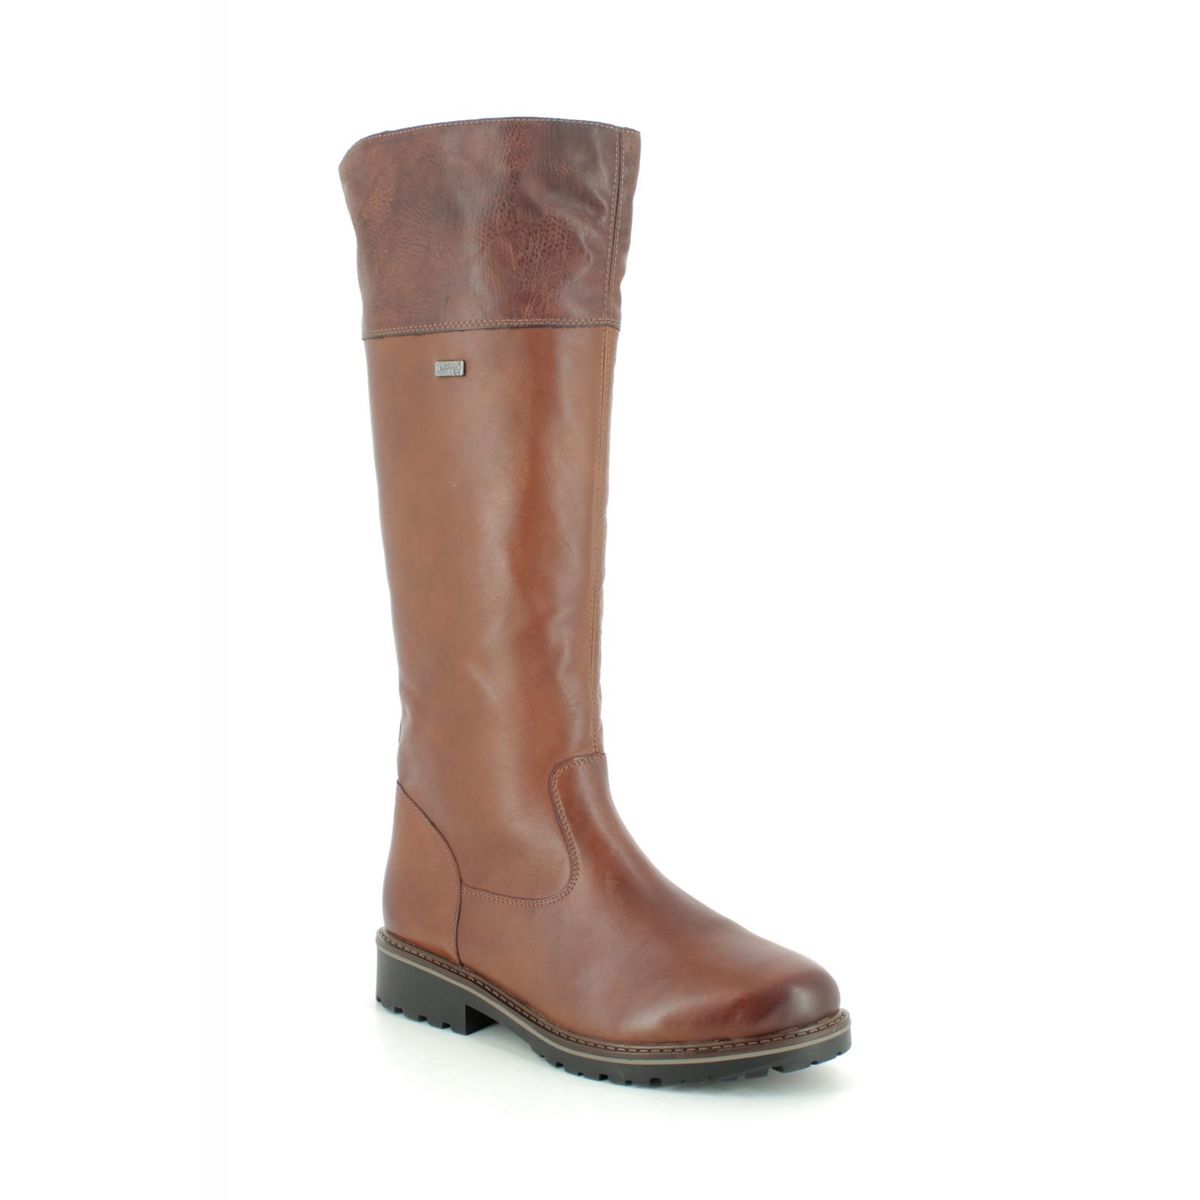 Remonte Indah Tex Tan Leather  Womens Knee-High Boots R6581-22 In Size 36 In Plain Tan Leather